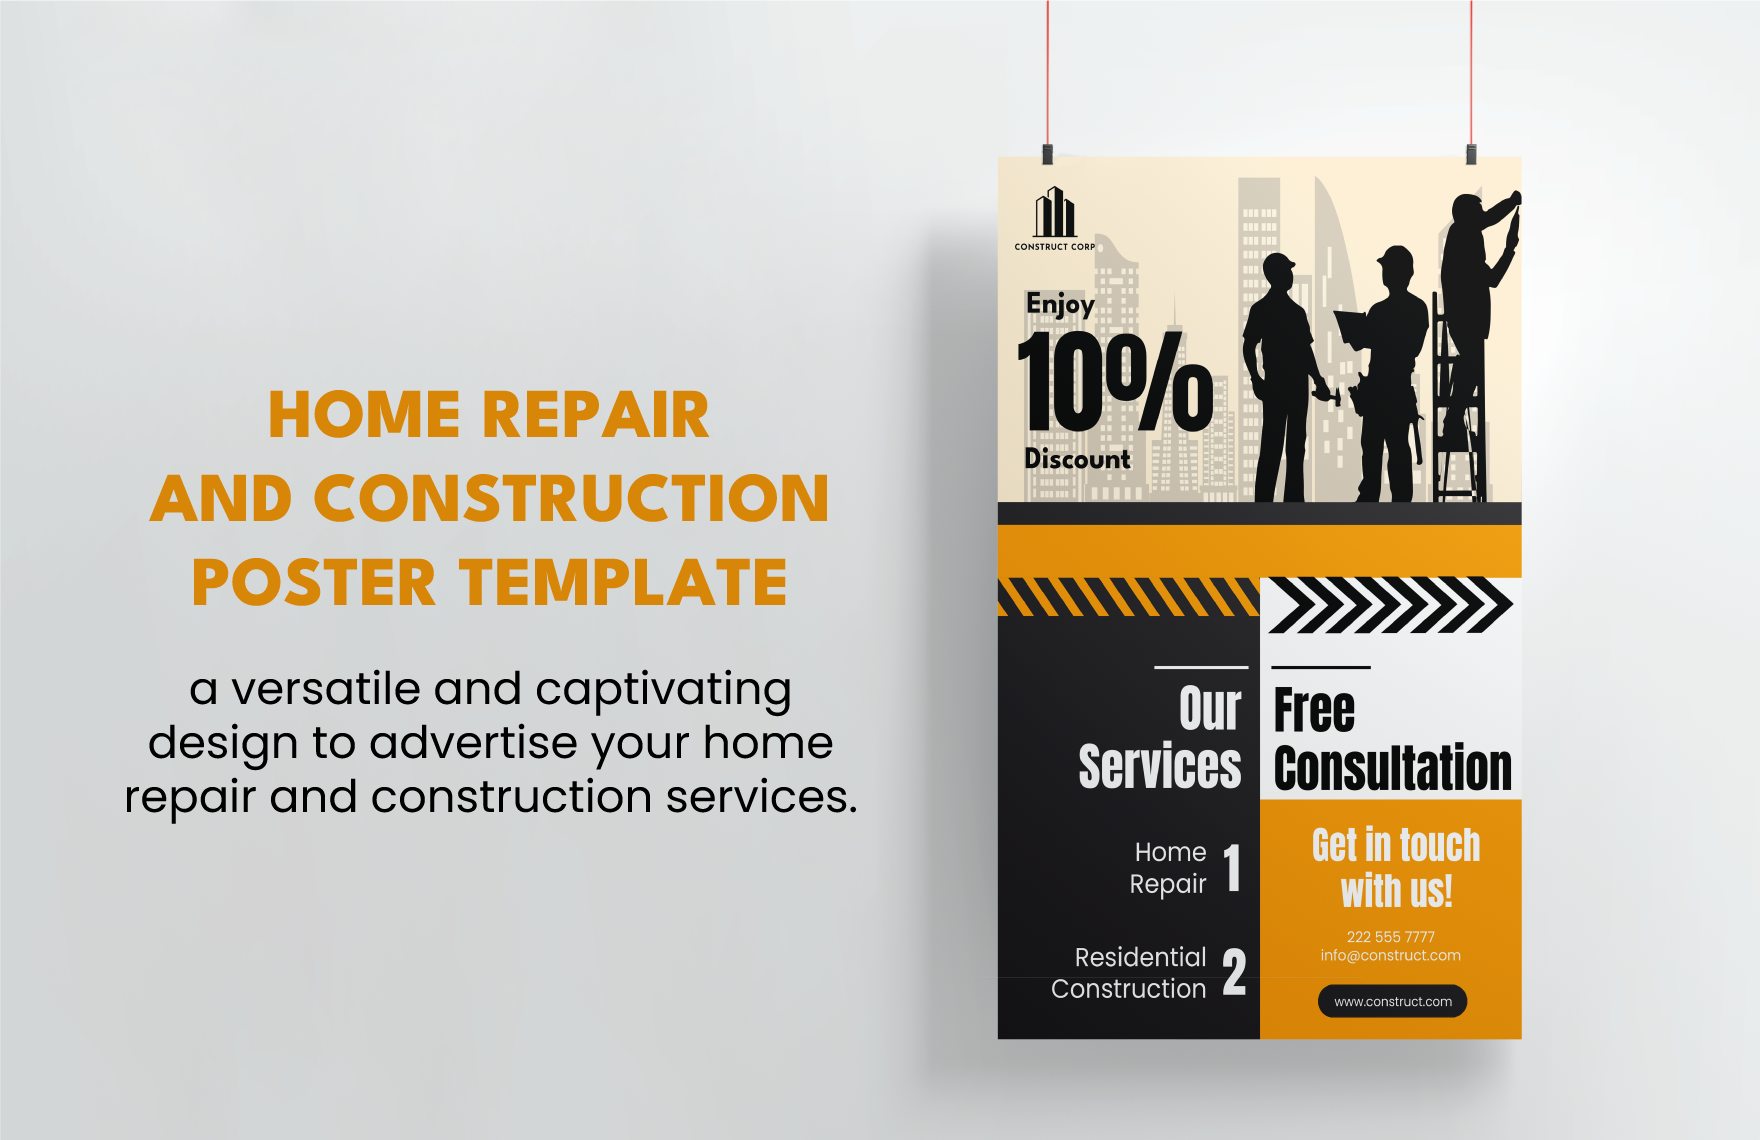 Home Repair and Construction Poster Template